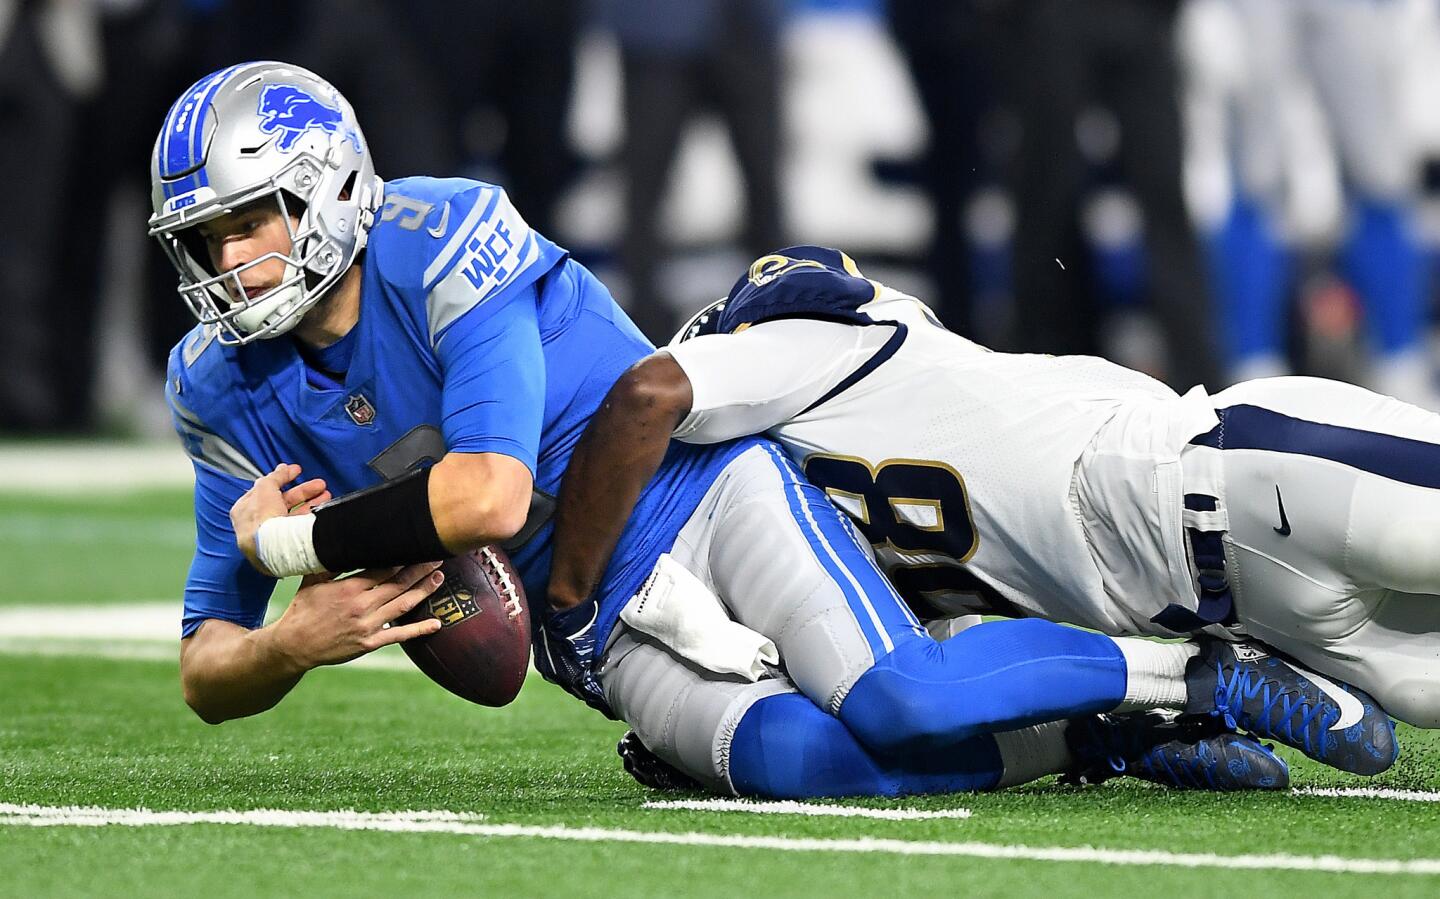 Detroit Lions quarterback Matthew Stafford fumbles the ball while being sacked by Rams linebacker Cory Littleton in the second quarter at Ford Field in Detroit on Sunday. The officails ruled he was down when tackeld.